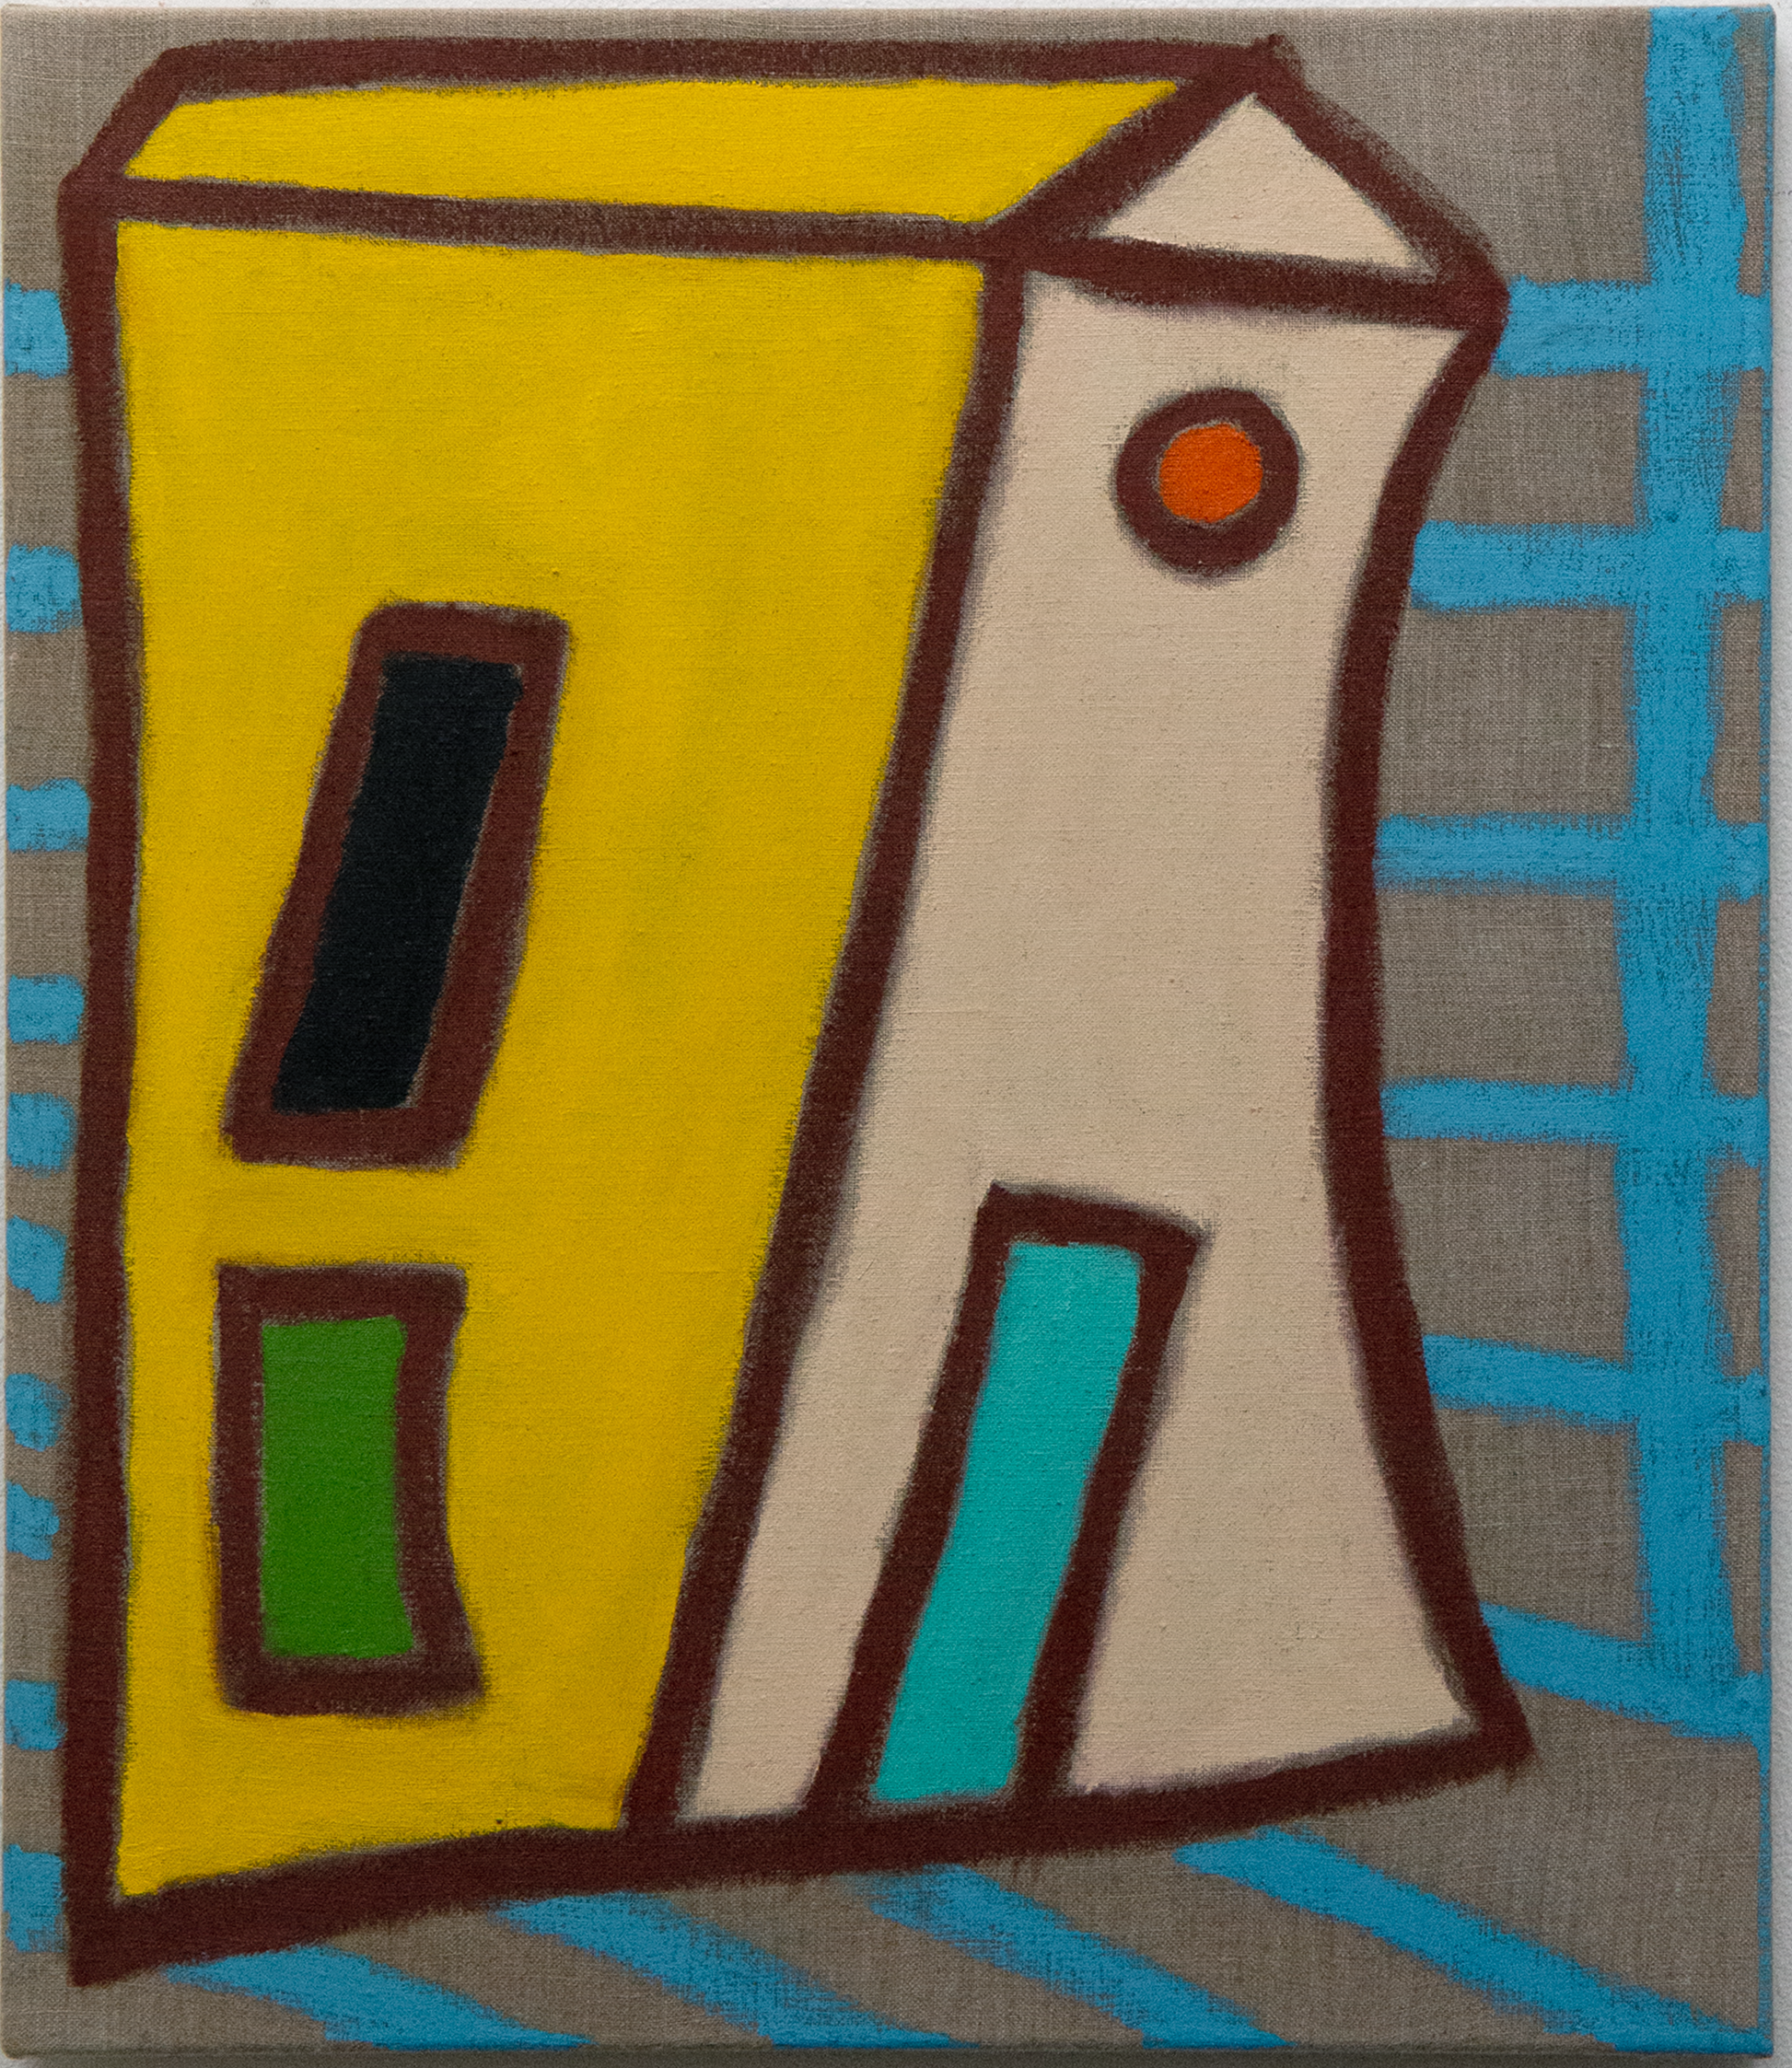 Een anorganische vorm <br><small> oilpaint and oil pastel on stretched linnen, 47 x 54 cm, €600</small>